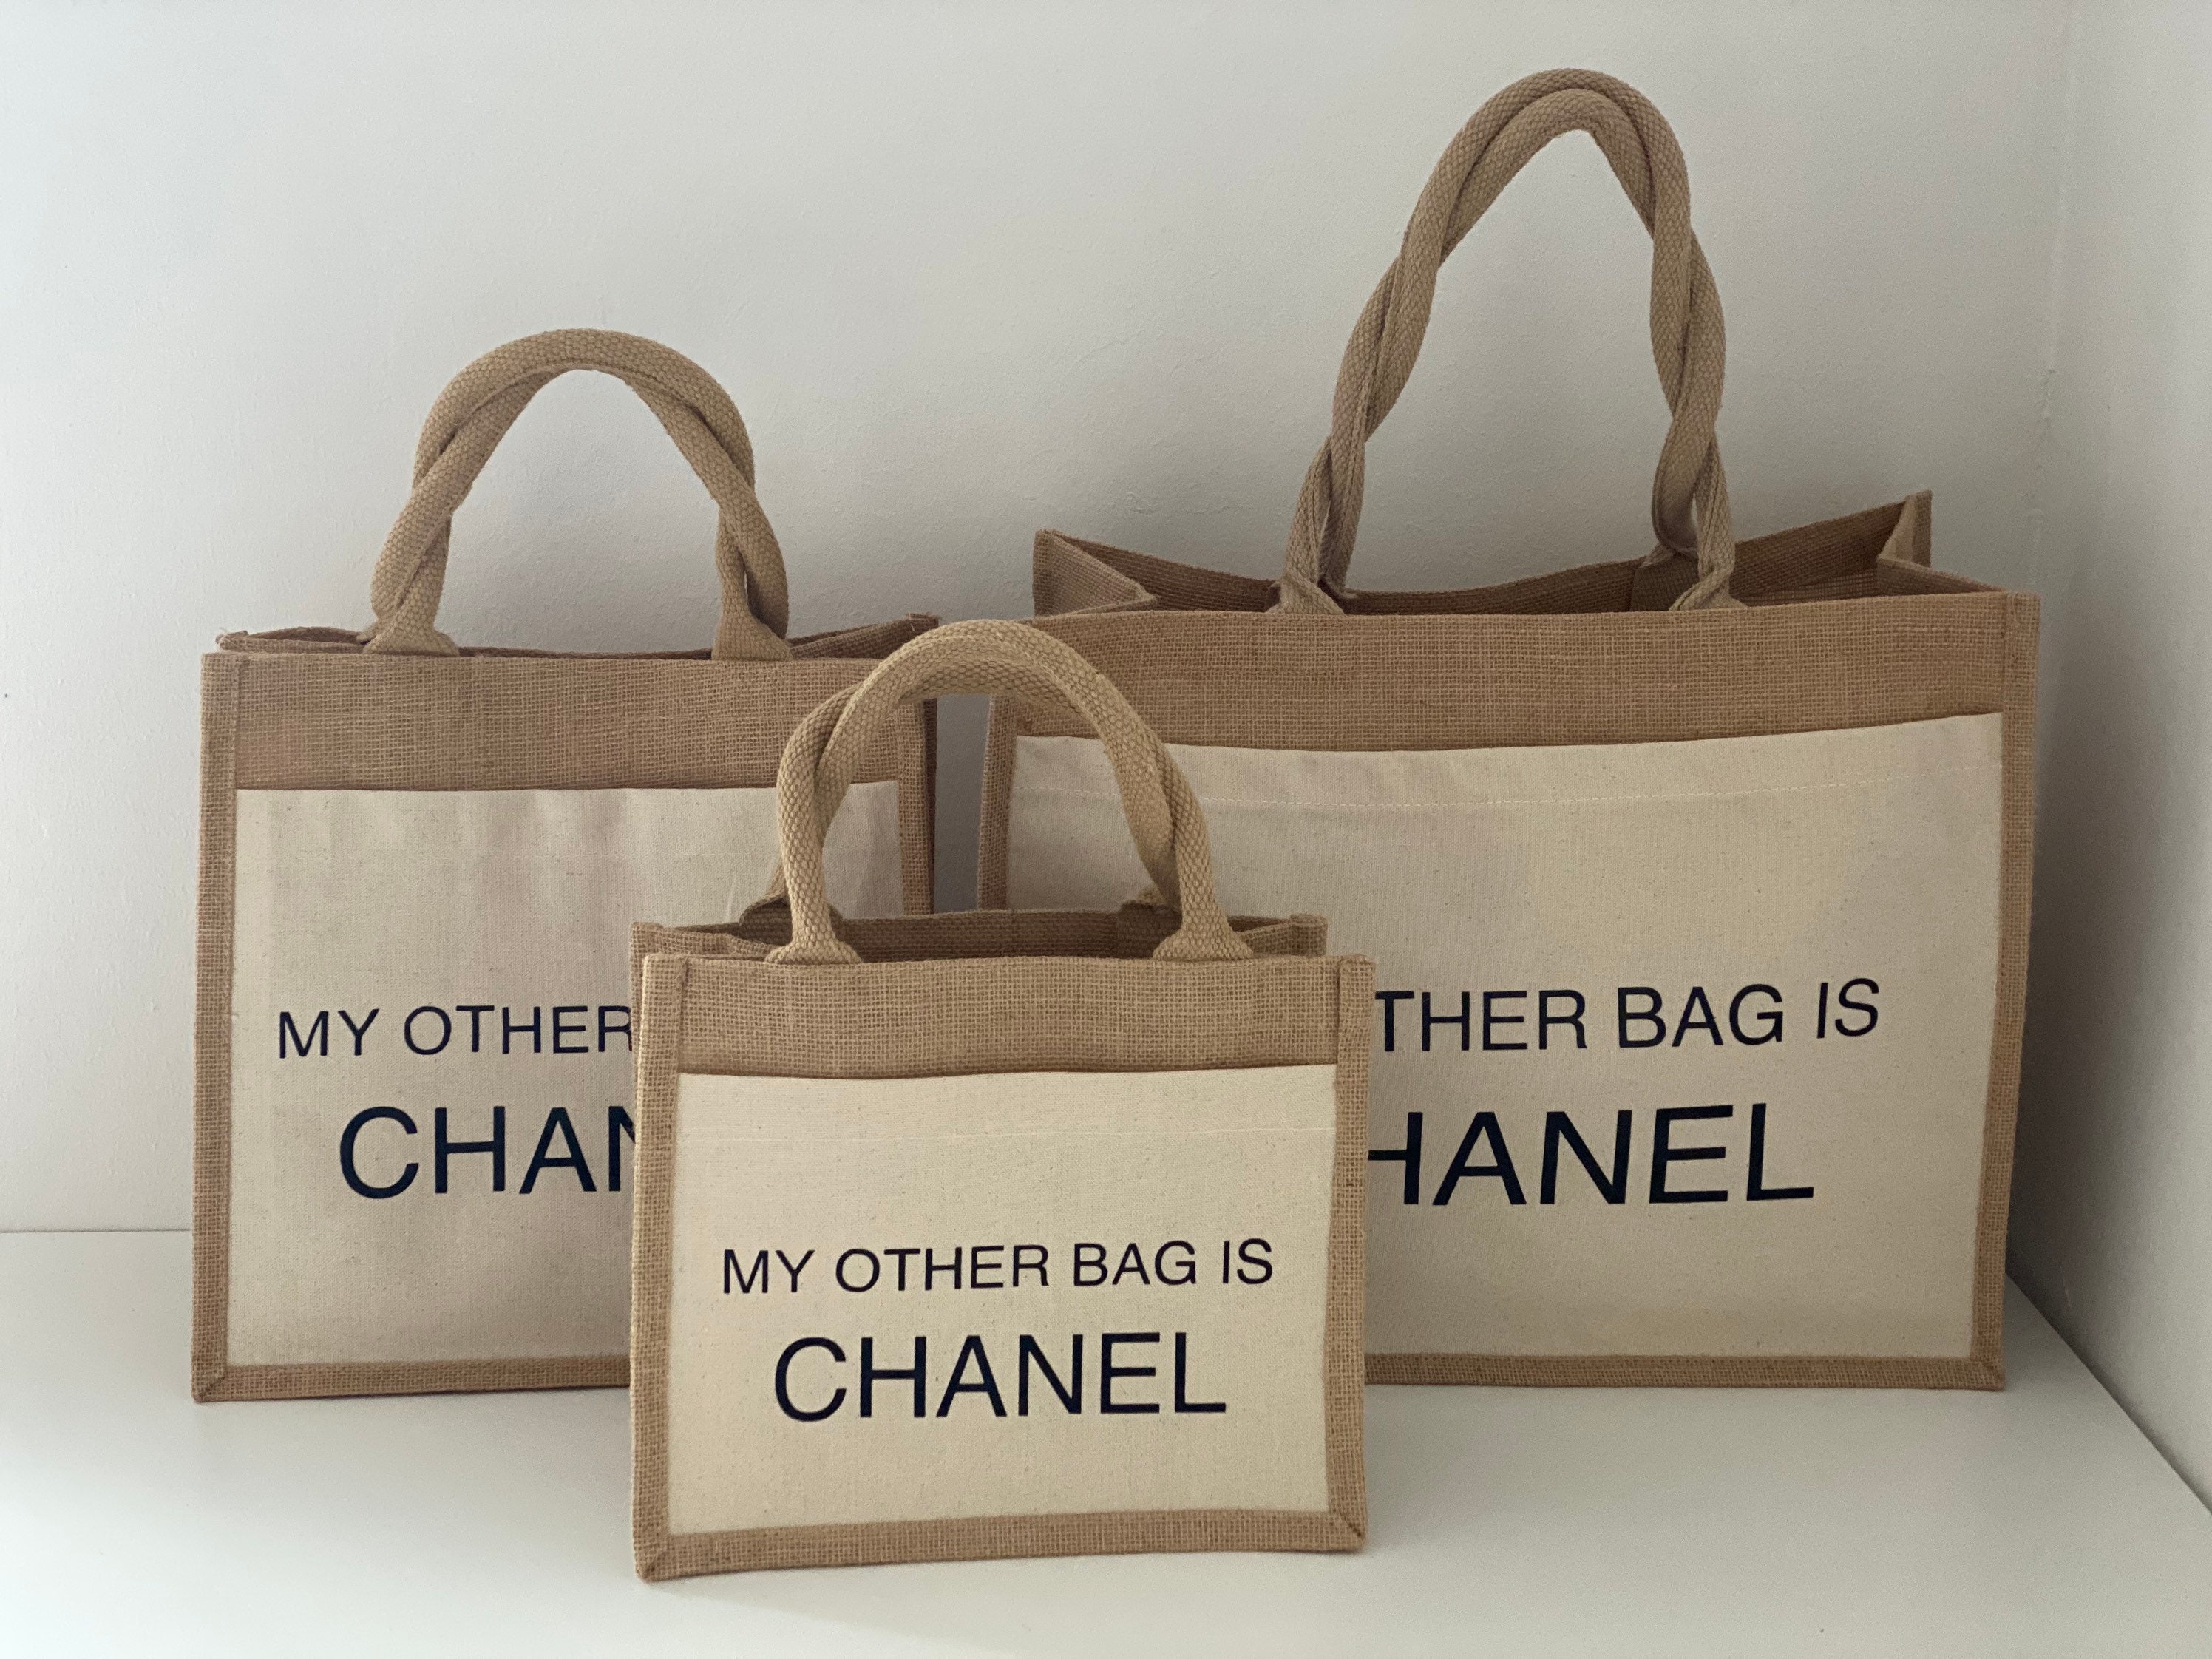 my other bag is chanel jute